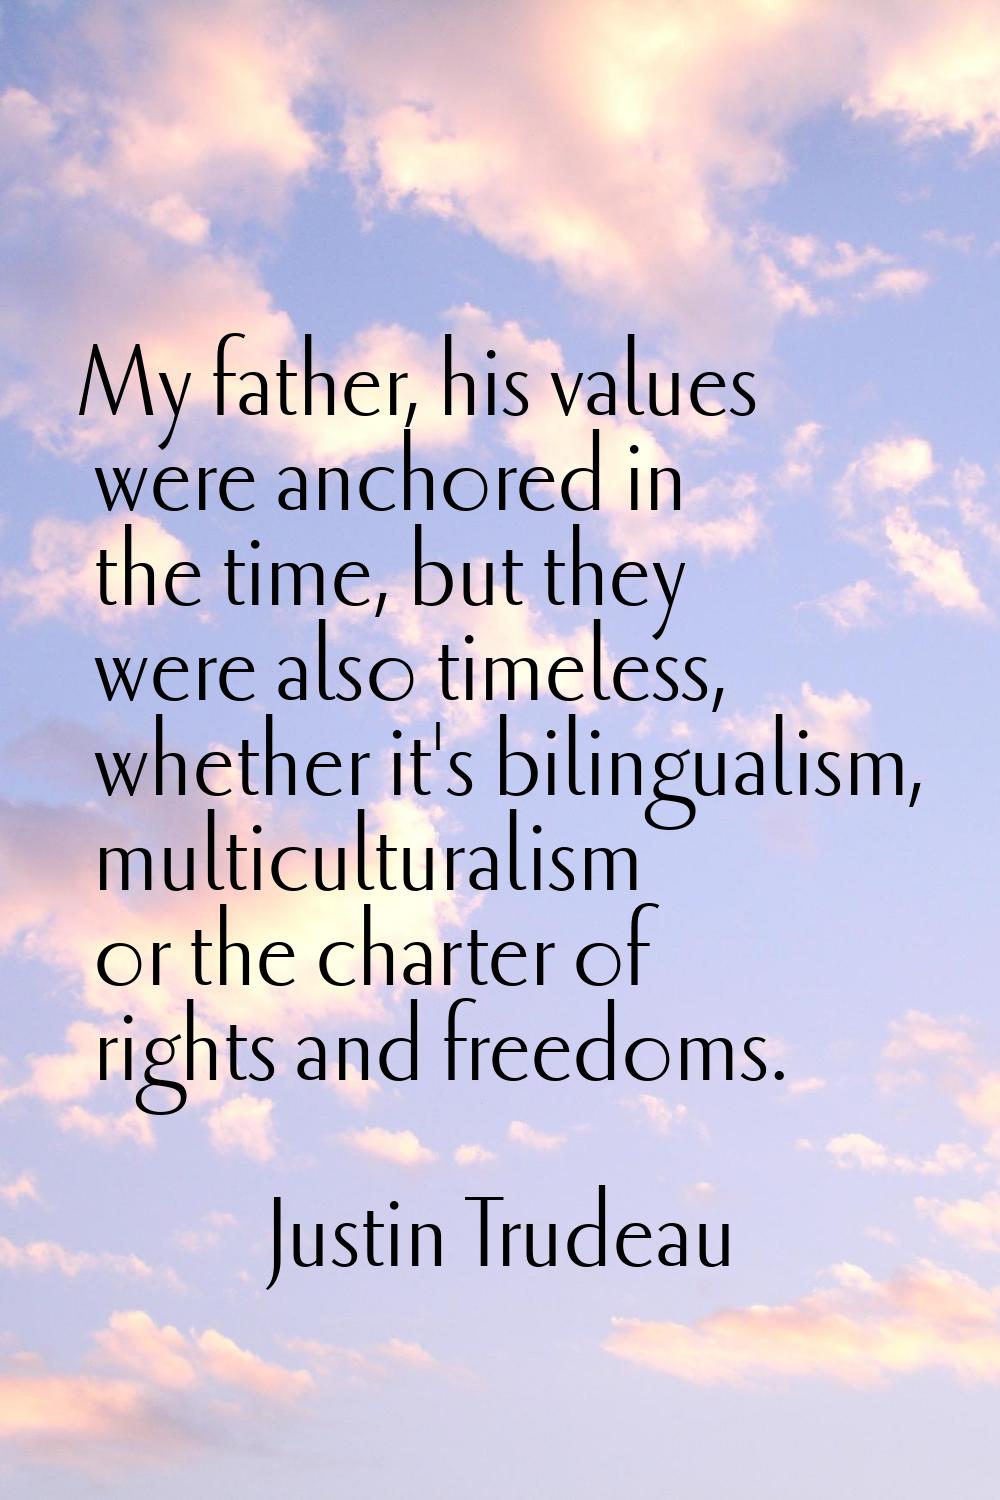 My father, his values were anchored in the time, but they were also timeless, whether it's bilingua